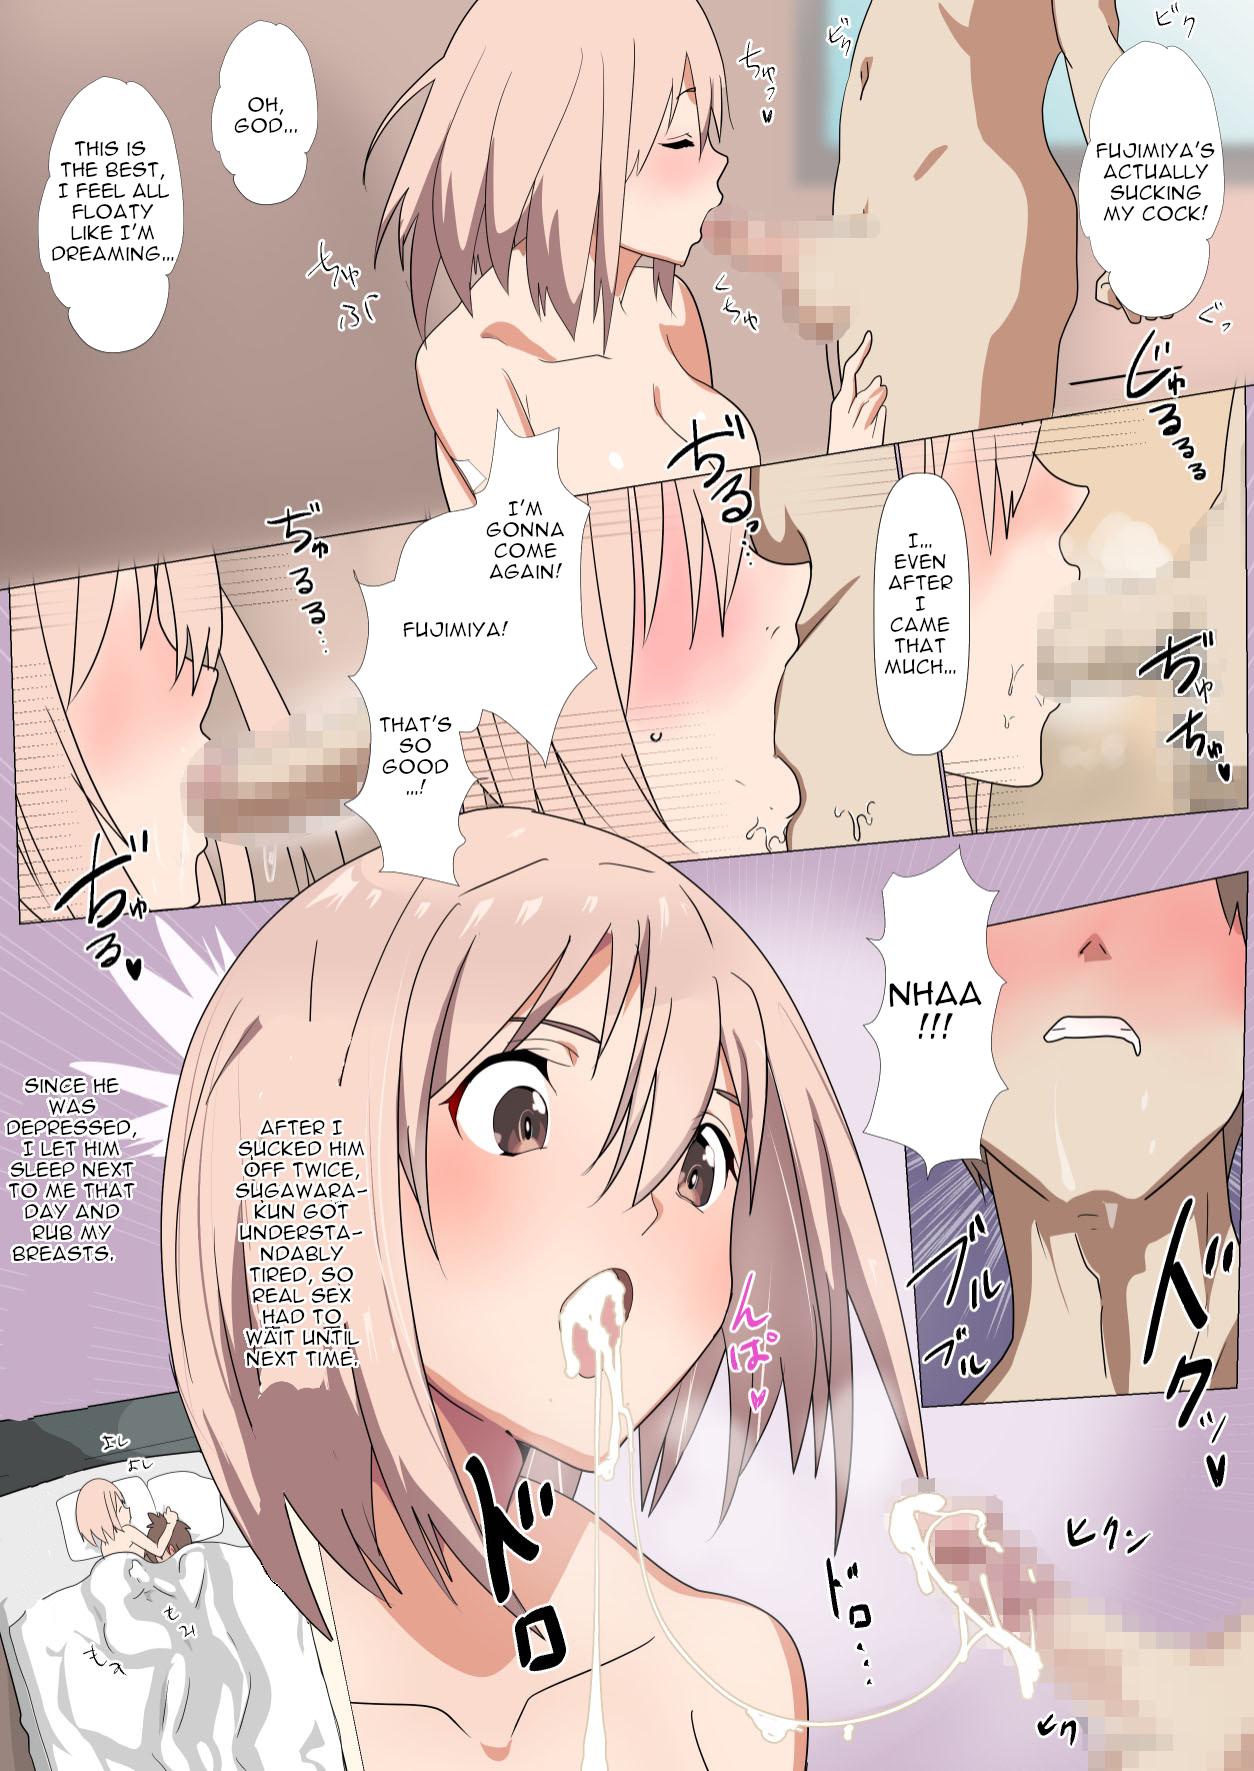 Throat The Day the Ribbon Fell ~ How I was NTR'd by a Playboy in my Class without My Childhood Friend Knowing - Original Blowjob - Page 8